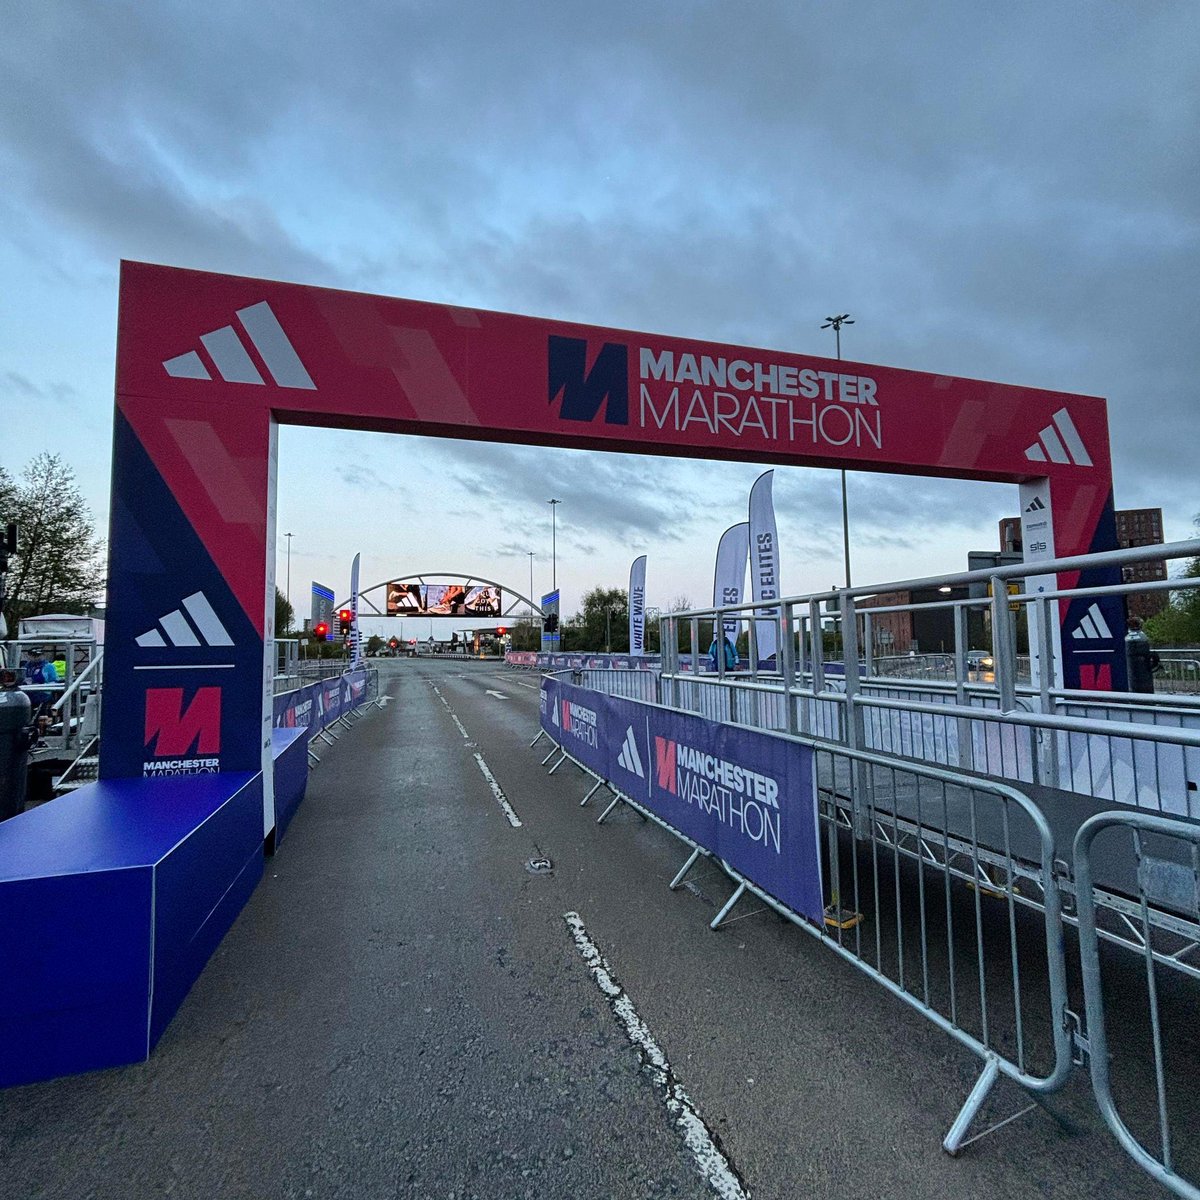 Good luck to everyone running the @Marathon_Mcr Manchester Marathon today. Fingers crossed the Manchester weather gods are kind for you all too. #ManchesterMarathon #thisismanchester #thisismcr #marathon #manchester